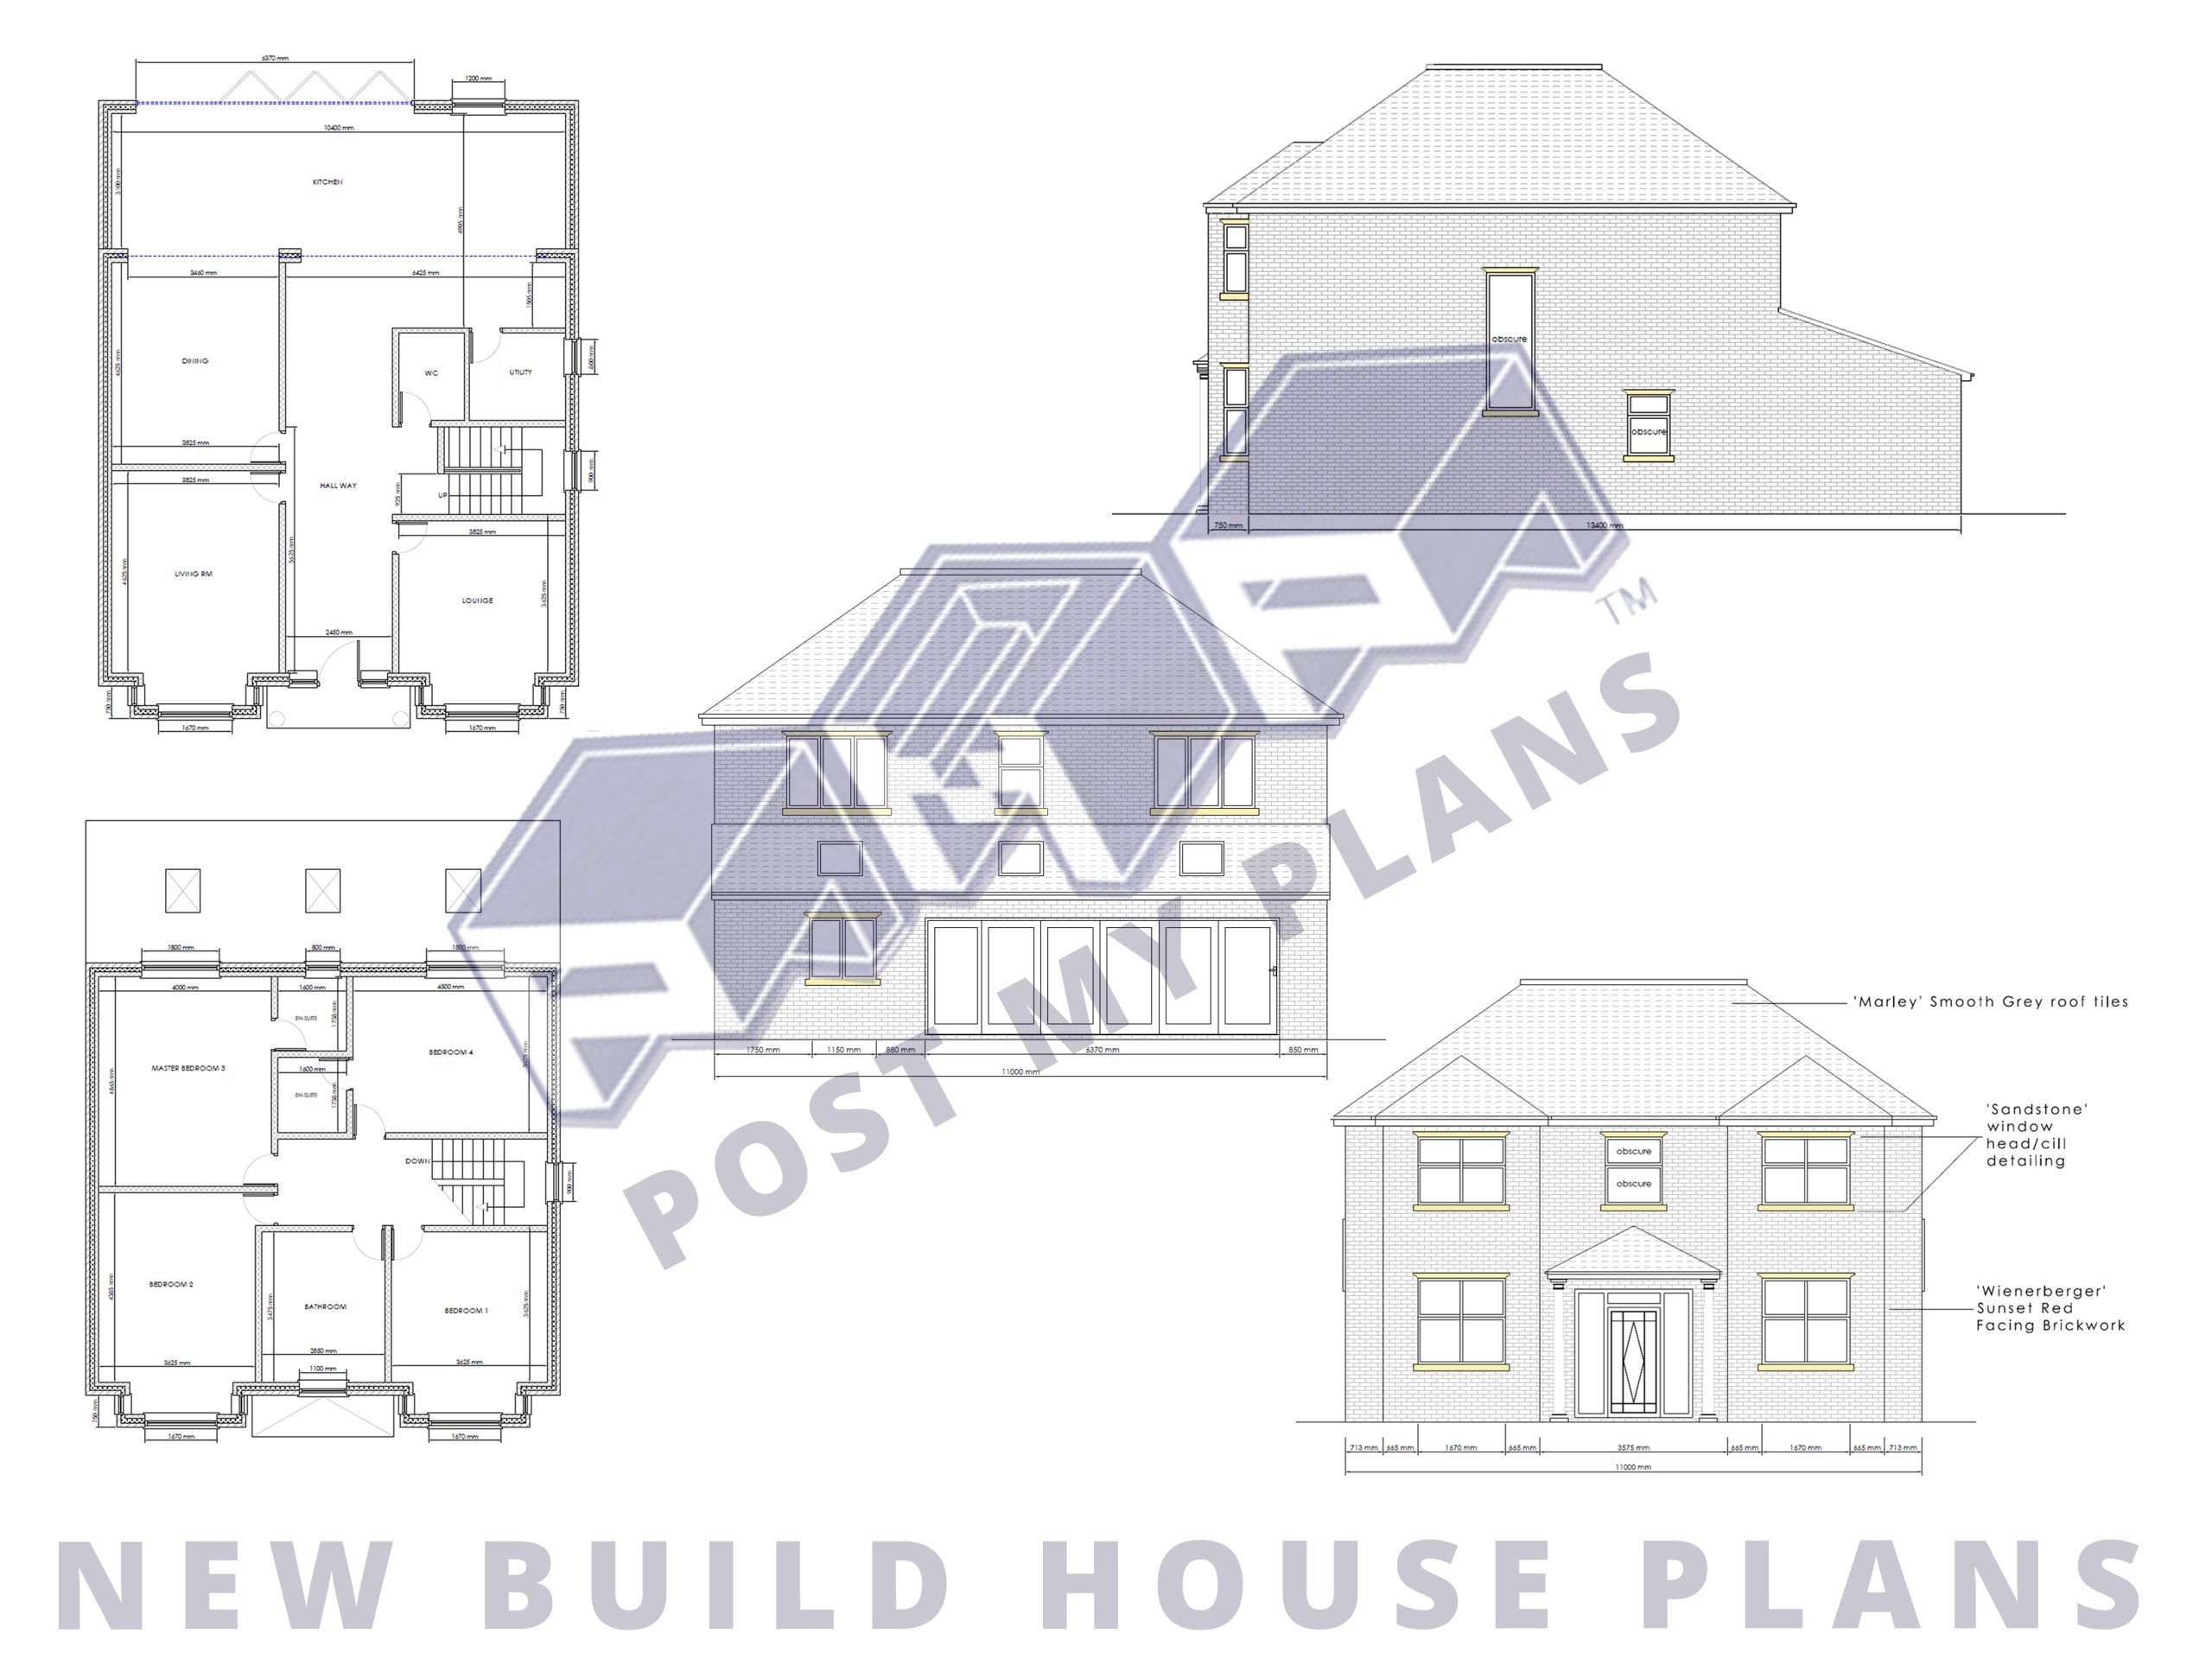 New Build House Plans scaled 8017cf0e